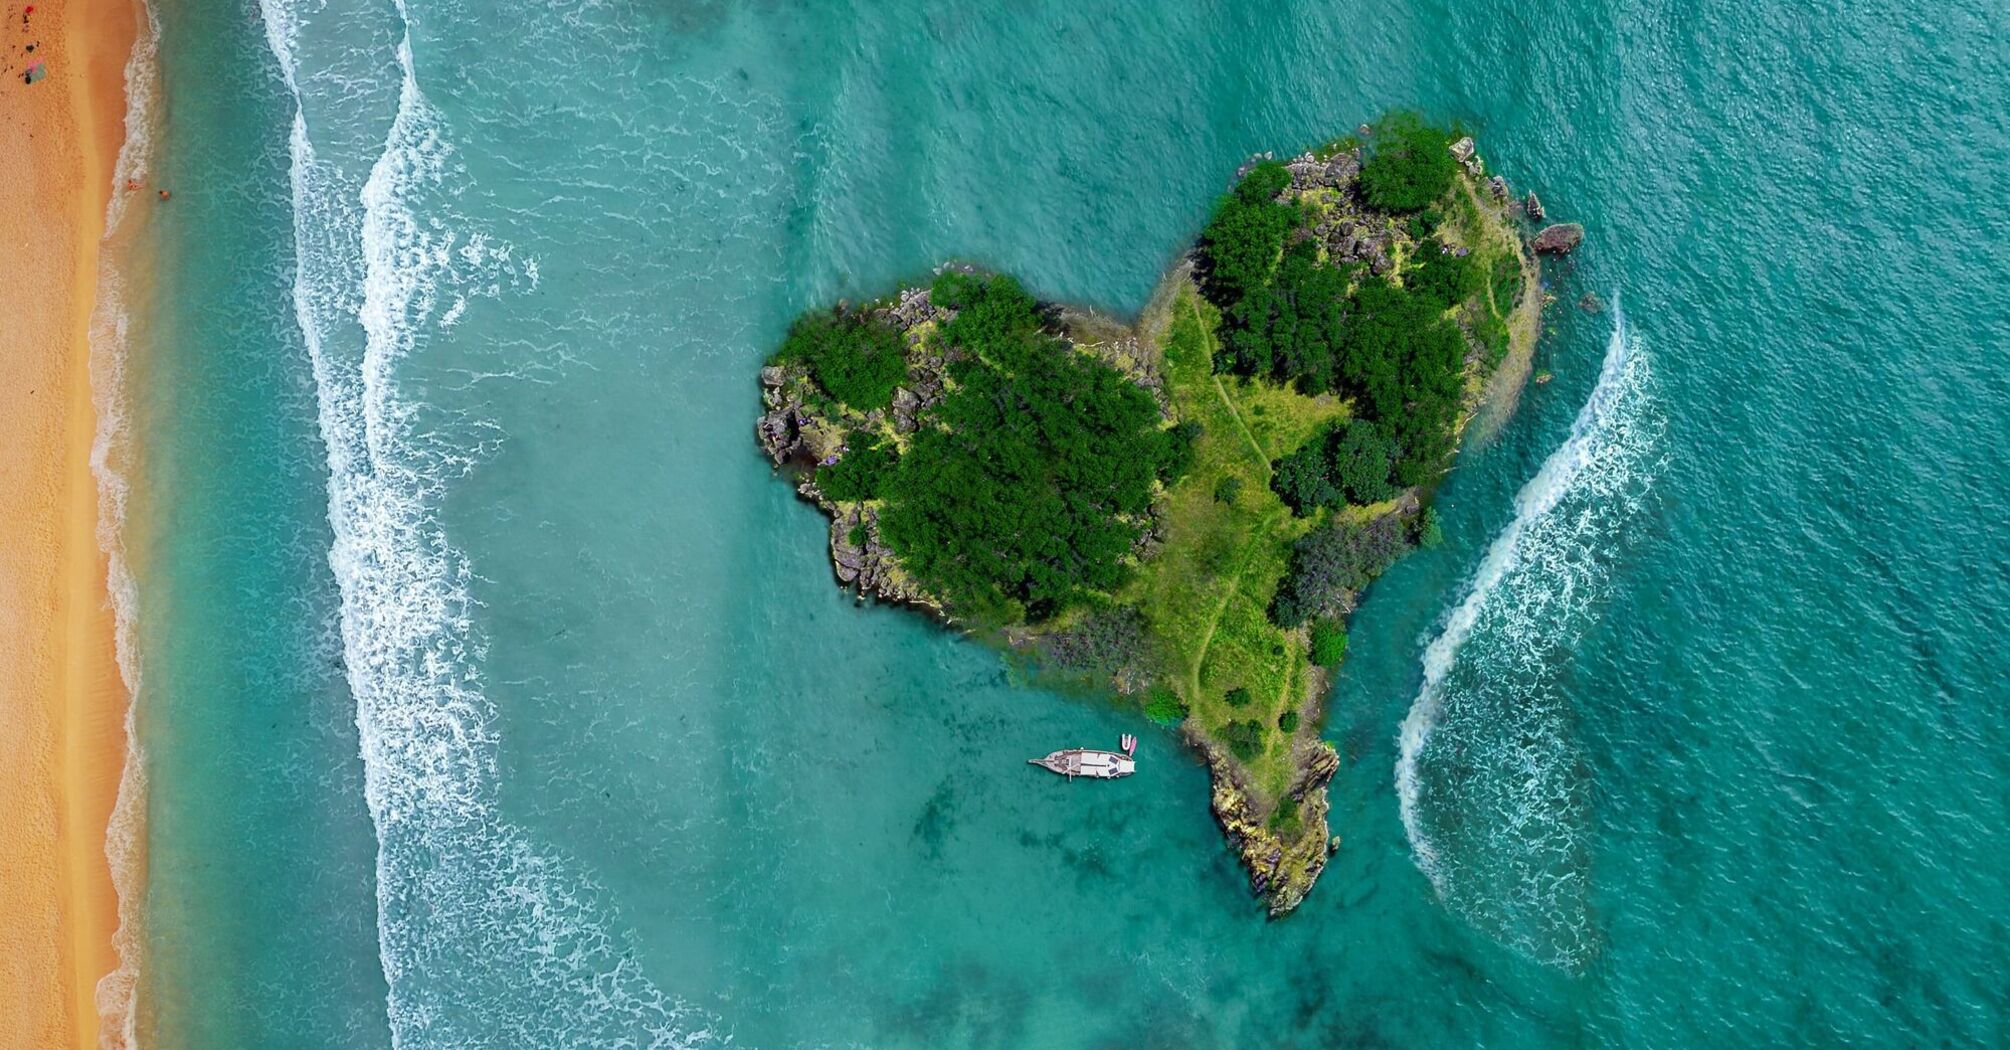 Complete privacy for less than $1,000: 11 private islands you can book for the night